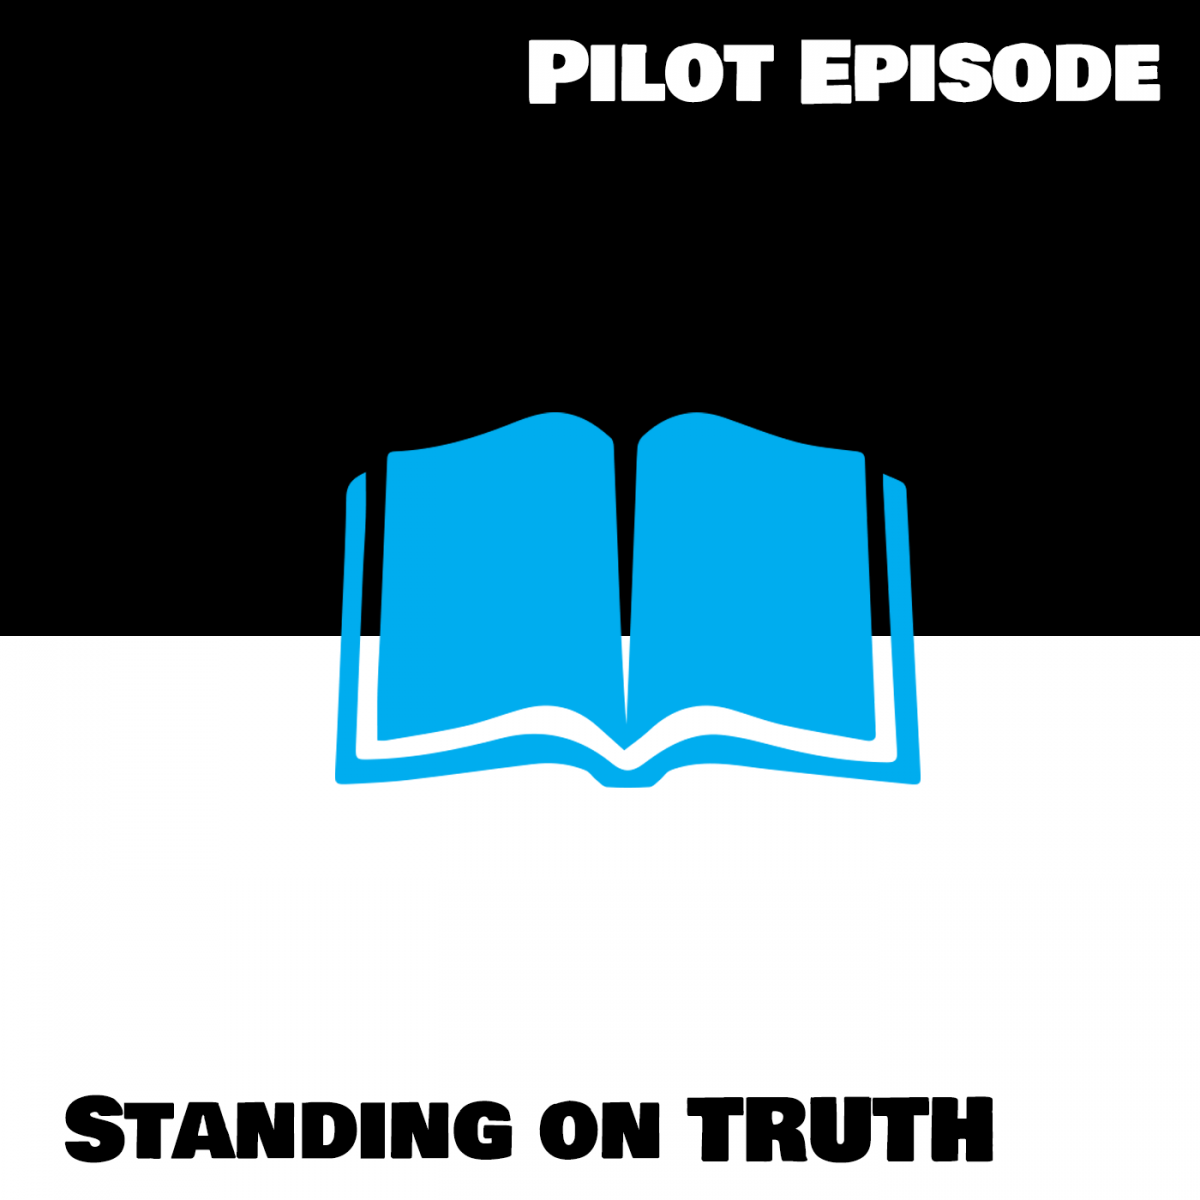 Pilot Episode: Standing on Truth